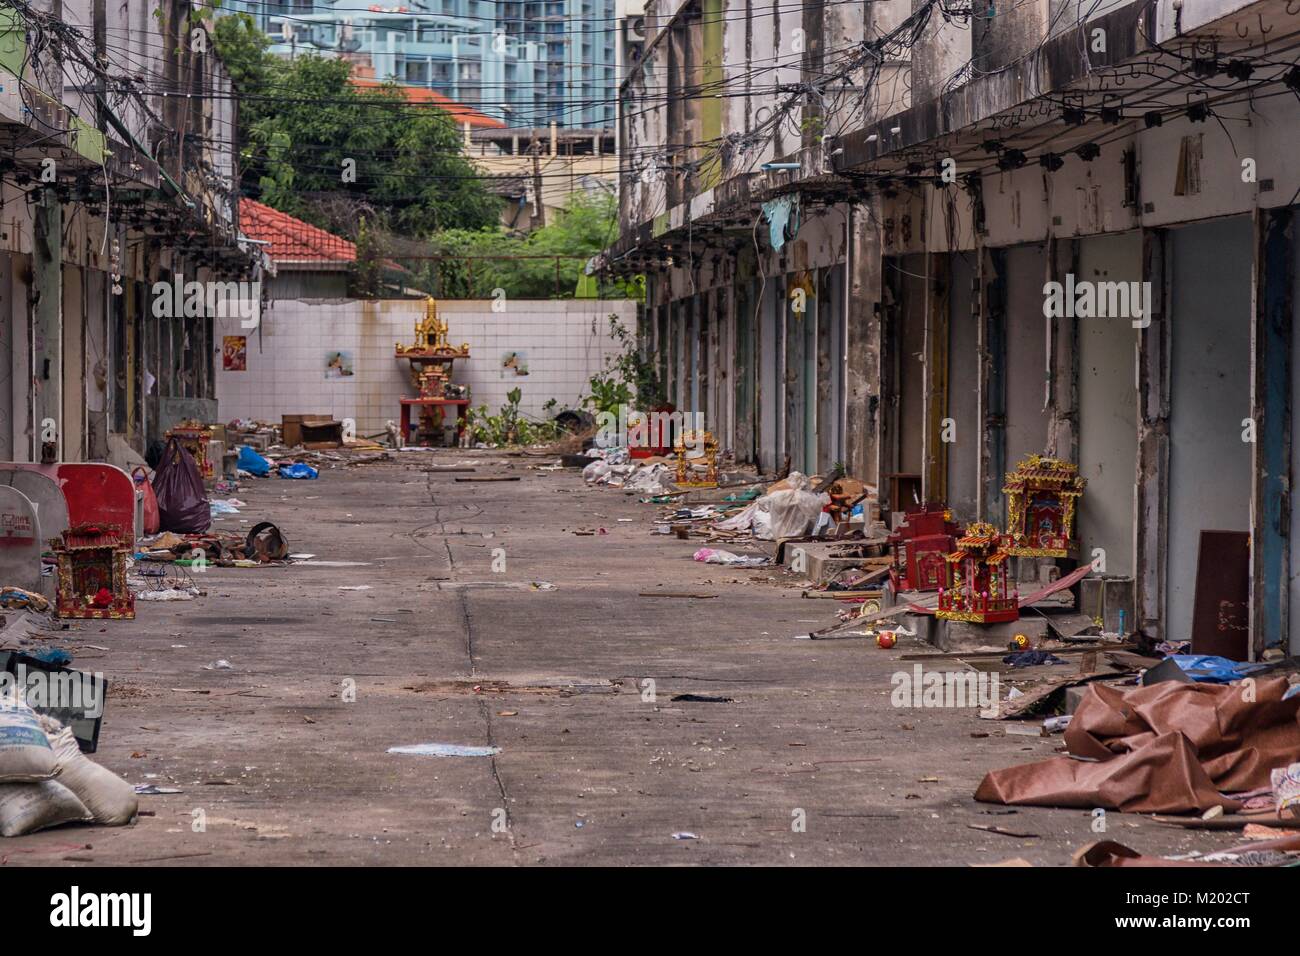 Shot at an abandoned street in Thailand, Southeast Asia Stock Photo